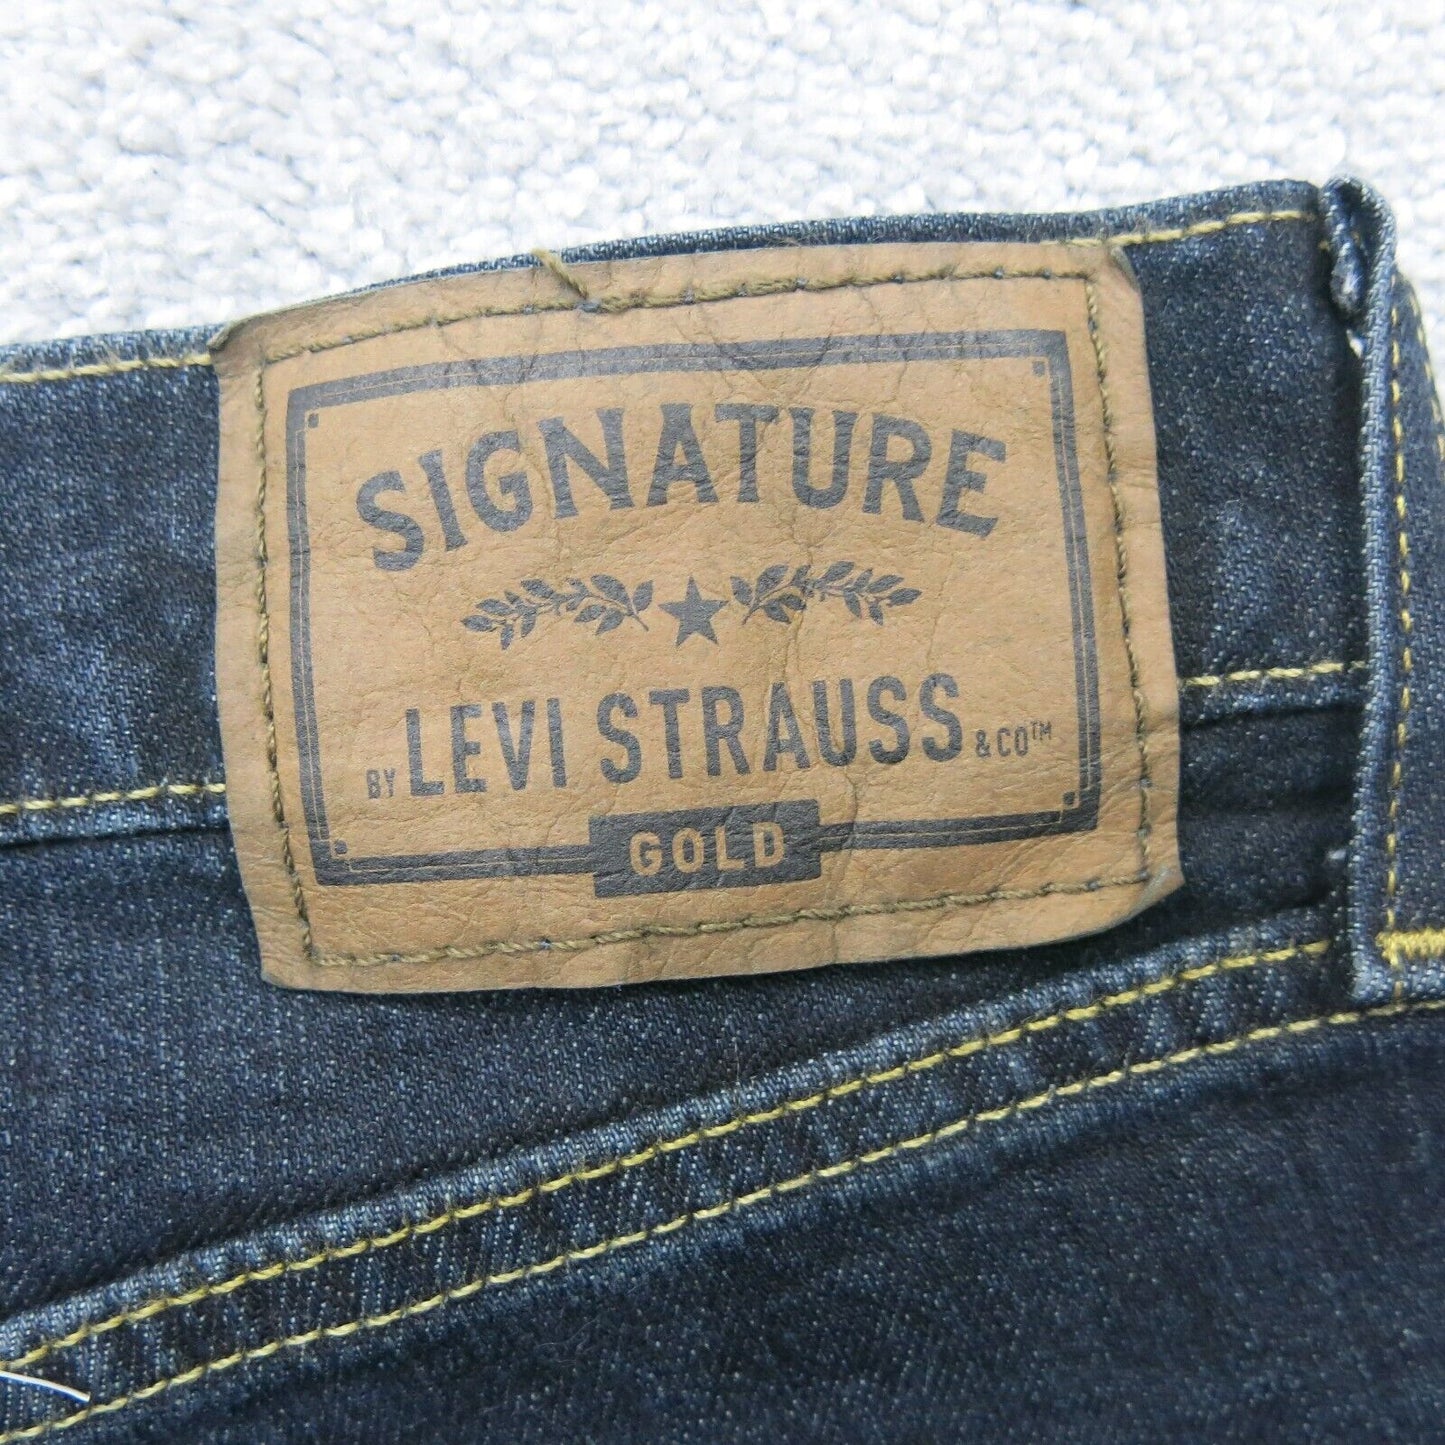 Signature Levis Mens Straight Leg Jeans Relaxed Fit Mid Rise Black Size W34XL30